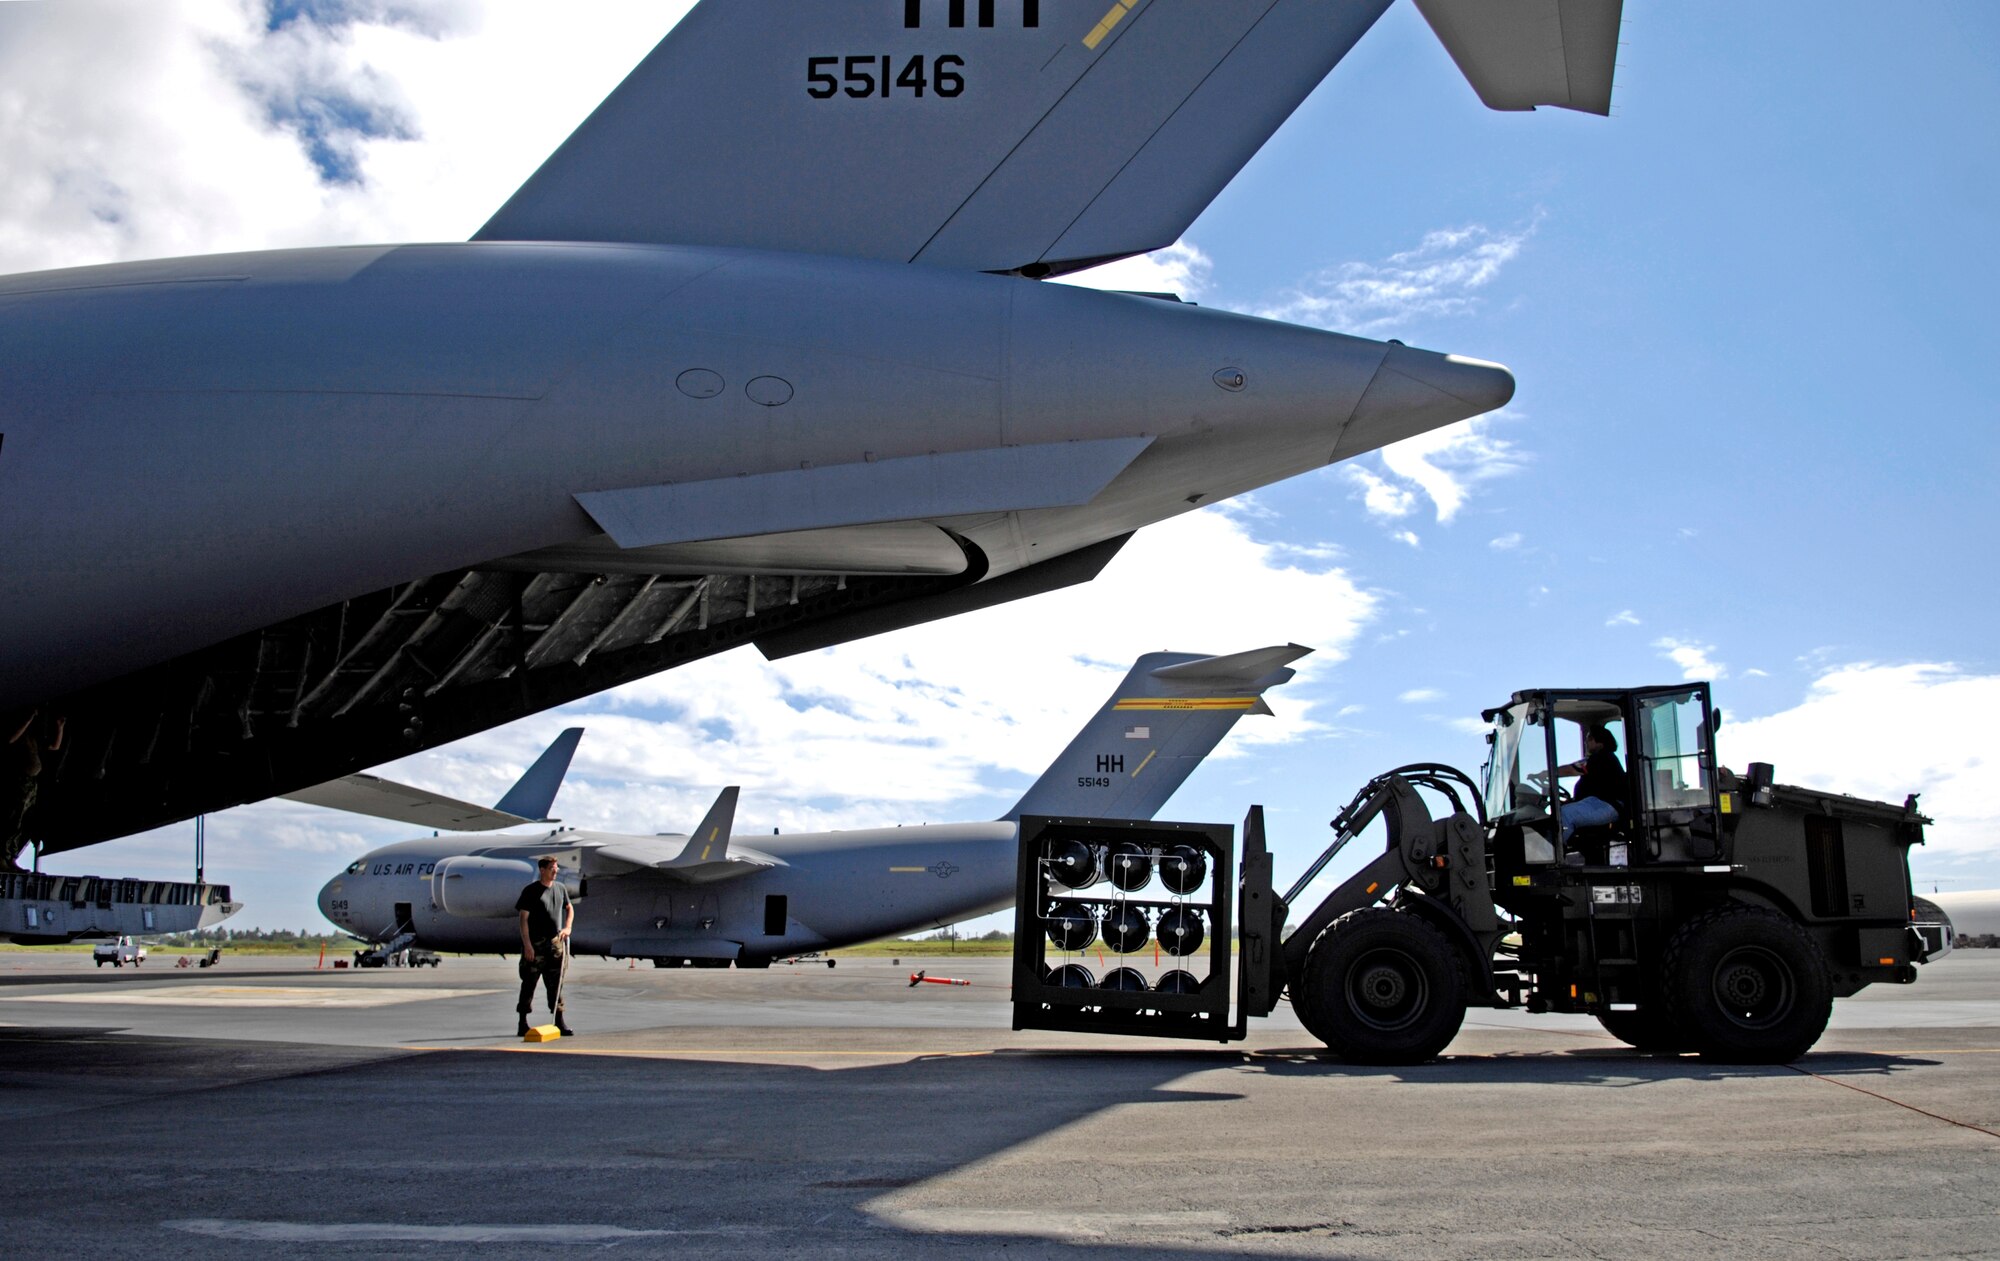 The HydraFLX System is brought up to the back end of a C-17 Globemaster III to demonstrate its mobile capability at Hickam Air Force Base, Hawaii Oct. 18, 2006. The HydraFLX System is being tested by the Air Force as an alternate energy source. It will generate ultra-pure H2 (hydrogen) from water in a flexible pressure management process for fueling buses, tow-tractors, vans, sedans and ground support equipment. The system can also be deployed anywhere and operate in hostile theaters without infrastructure or pipelines. 